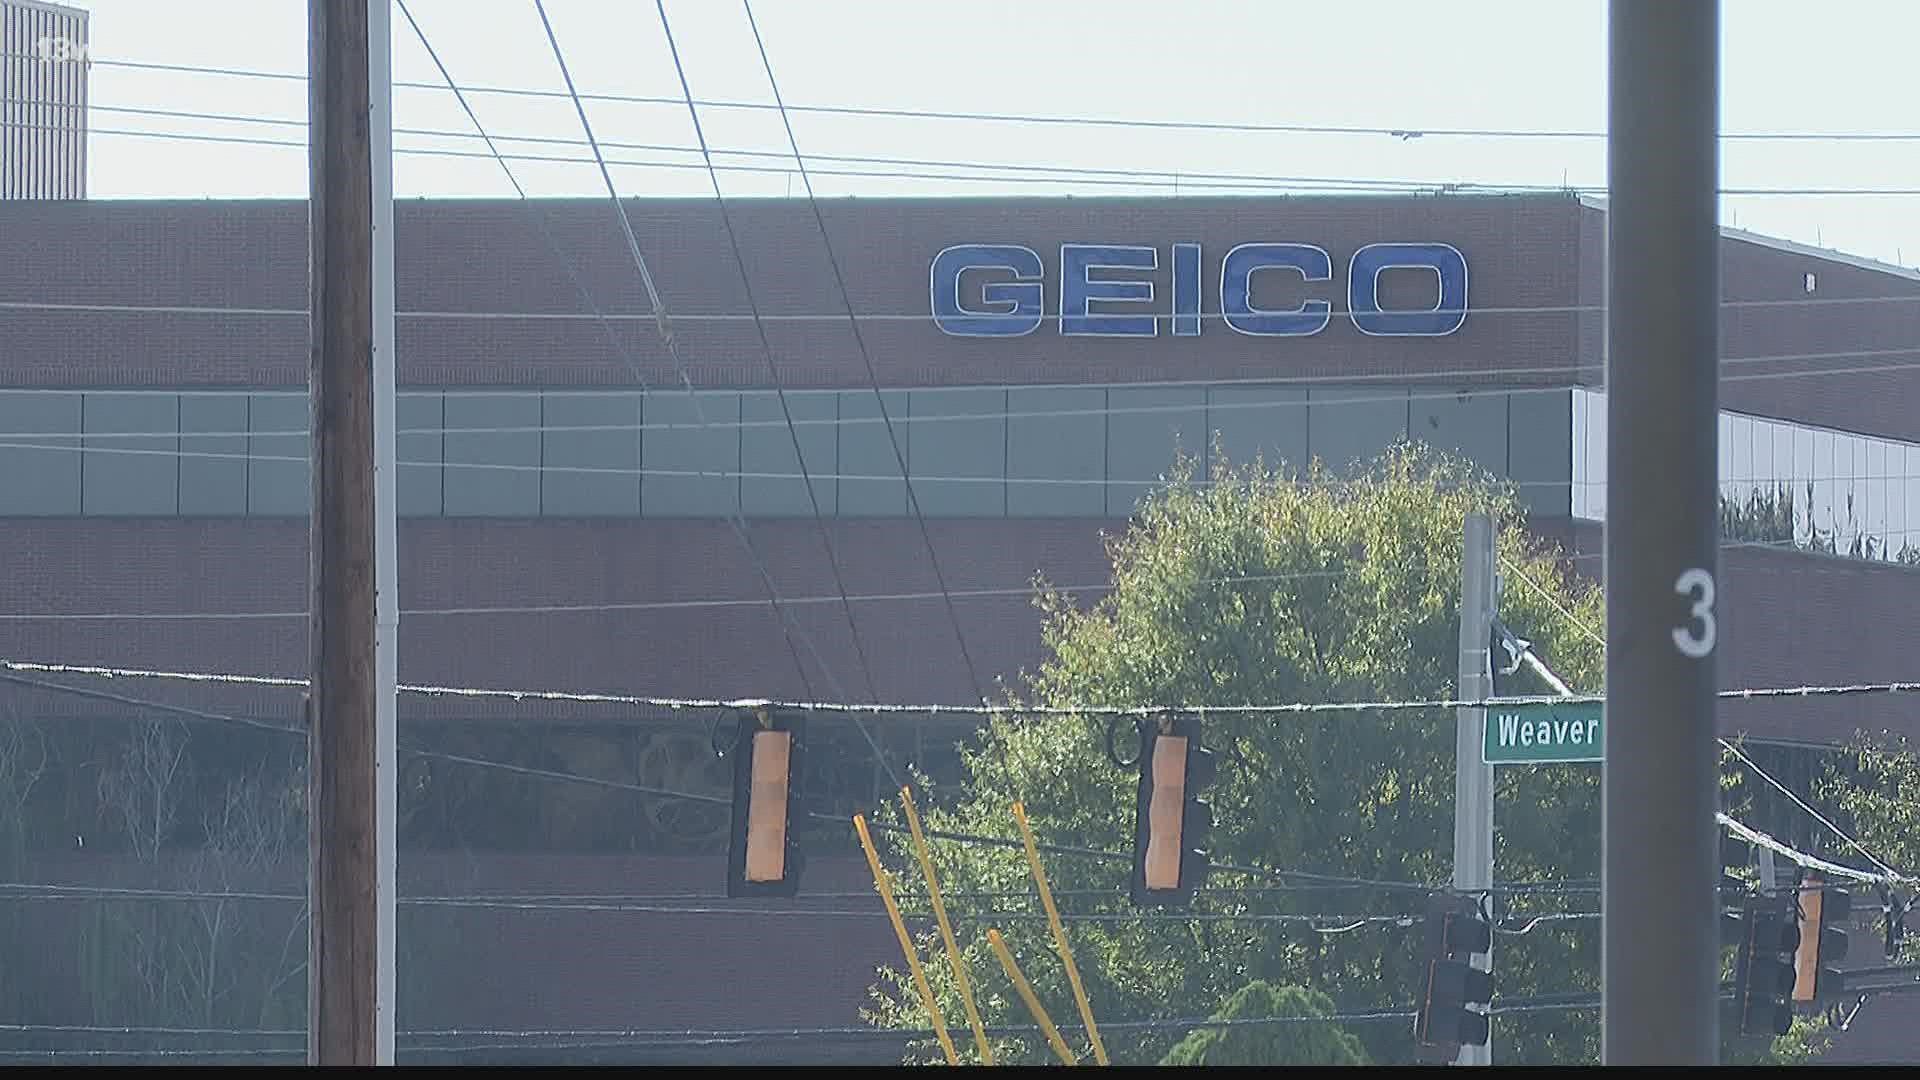 Geico said they're adjusting their Macon staffing "to changing customer and business priorities."